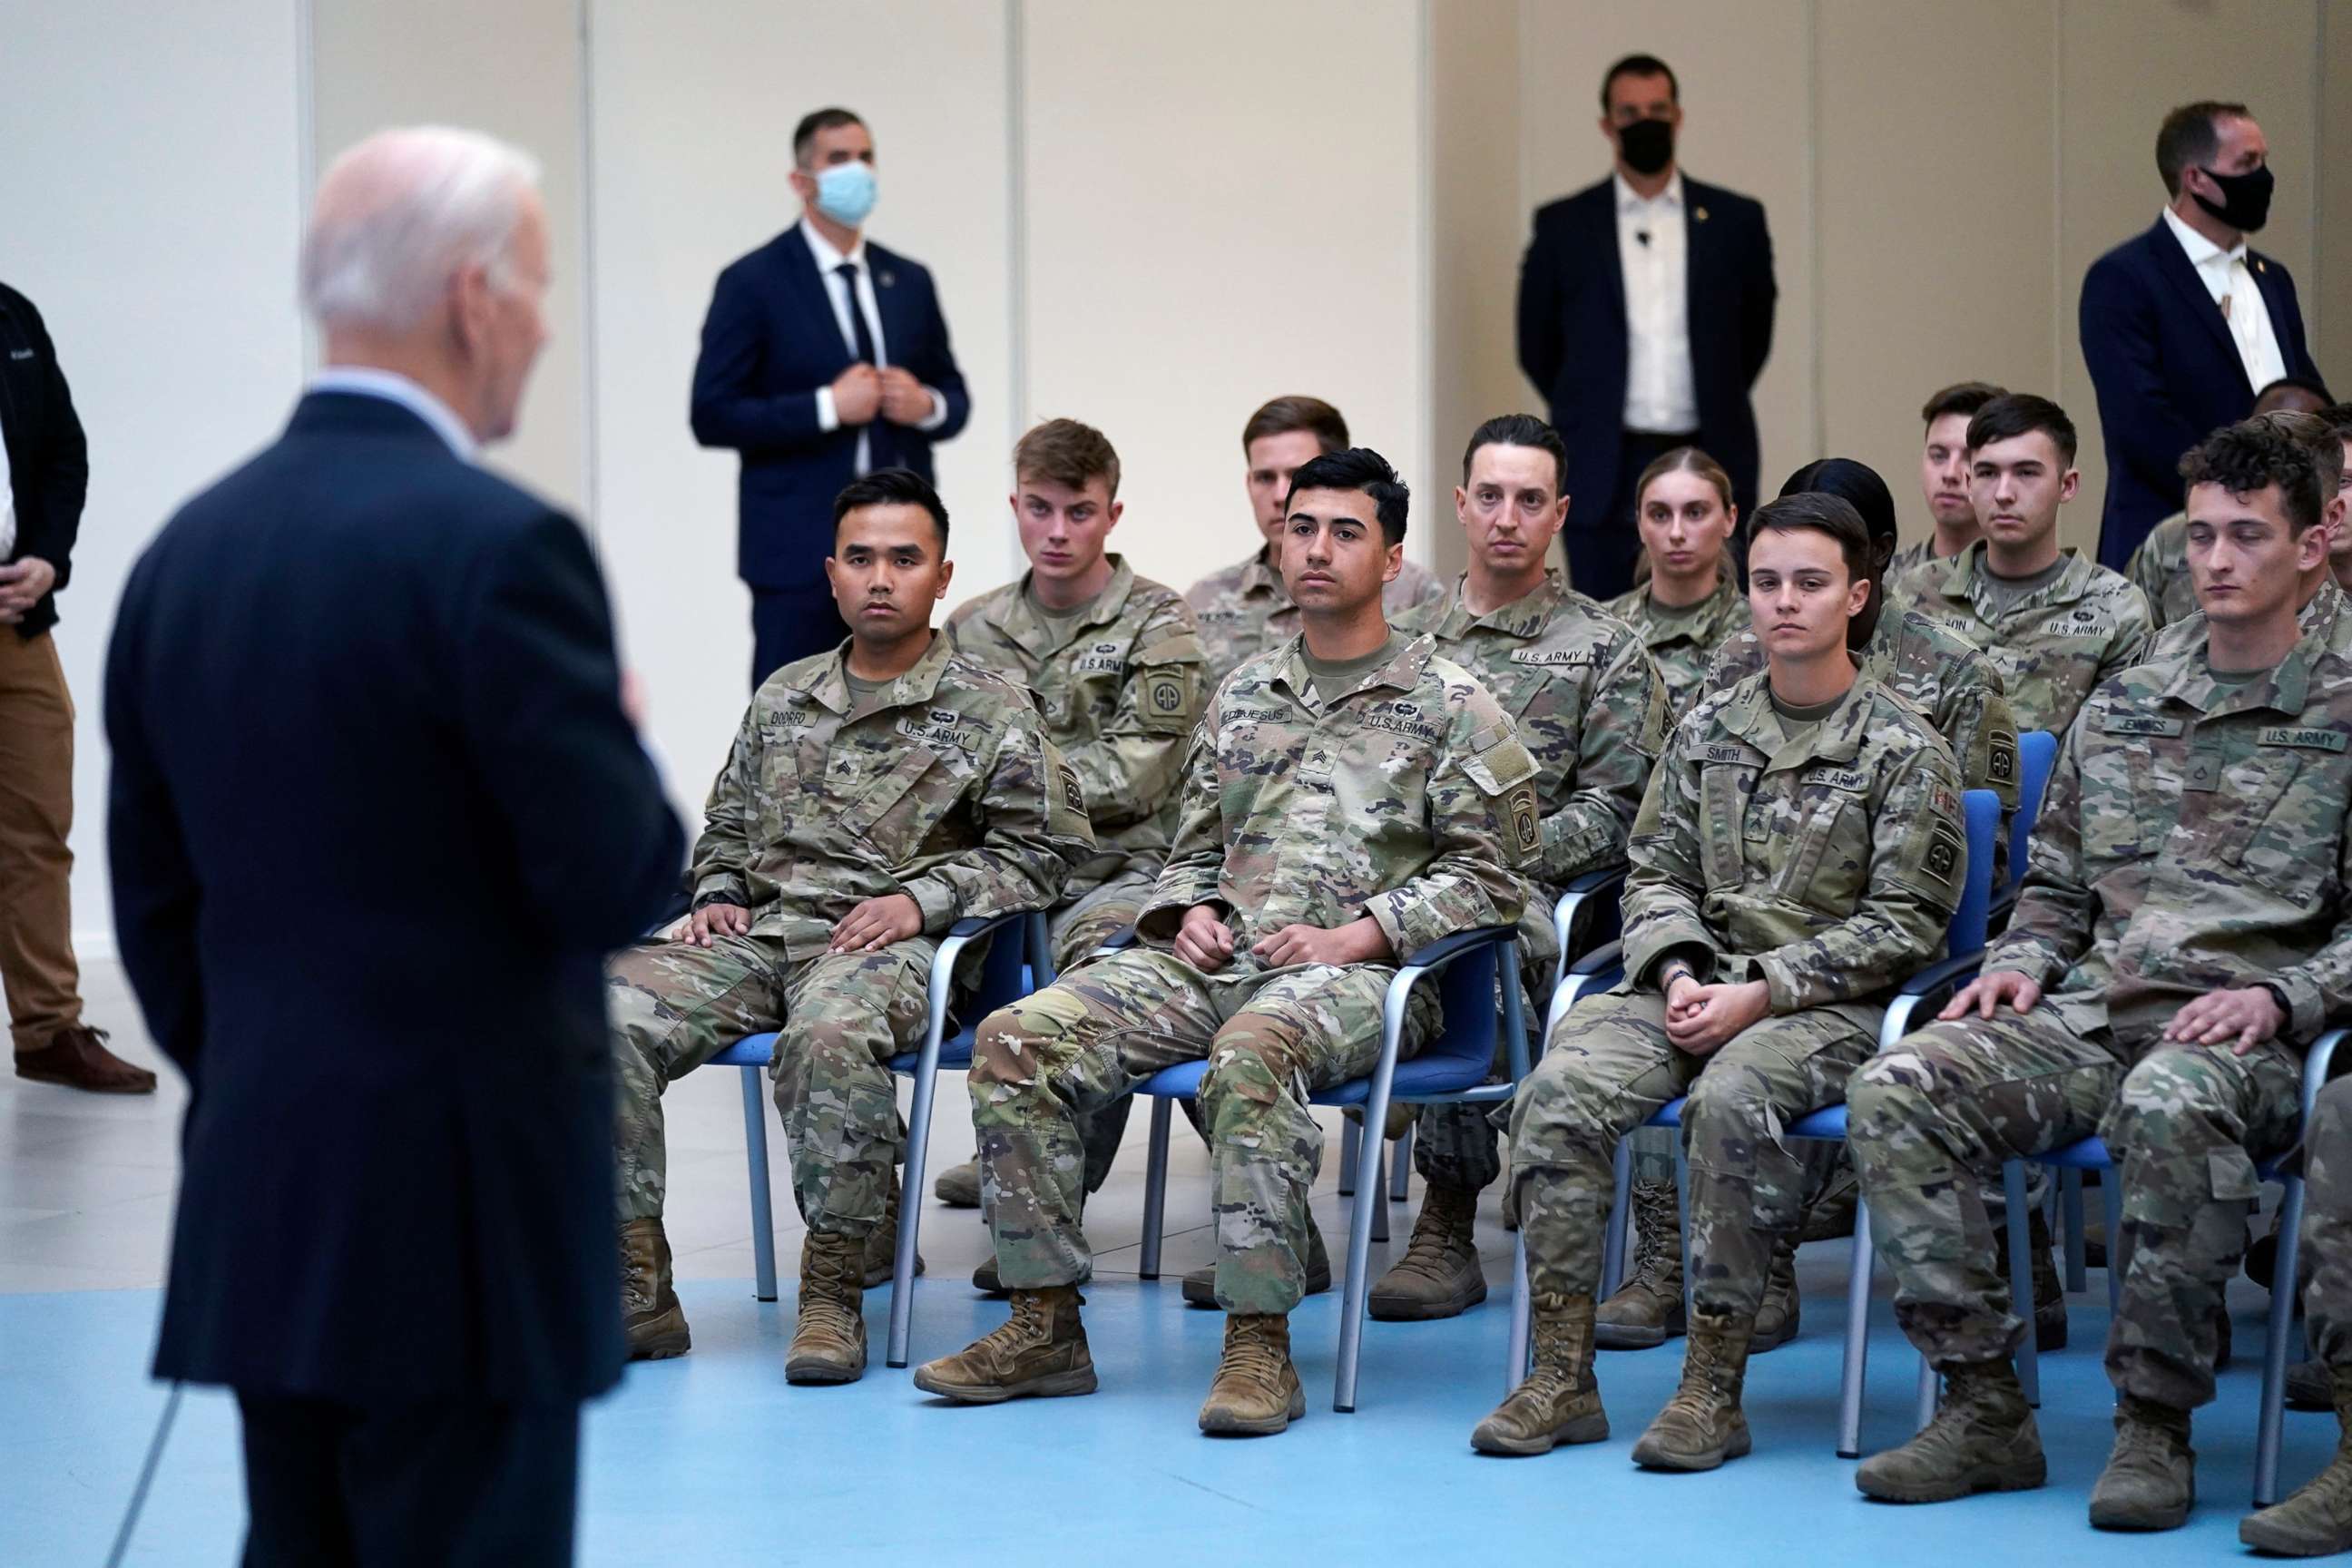 PHOTO: President Joe Biden speaks to members of the 82nd Airborne Division at the G2A Arena, March 25, 2022, in Jasionka, Poland.